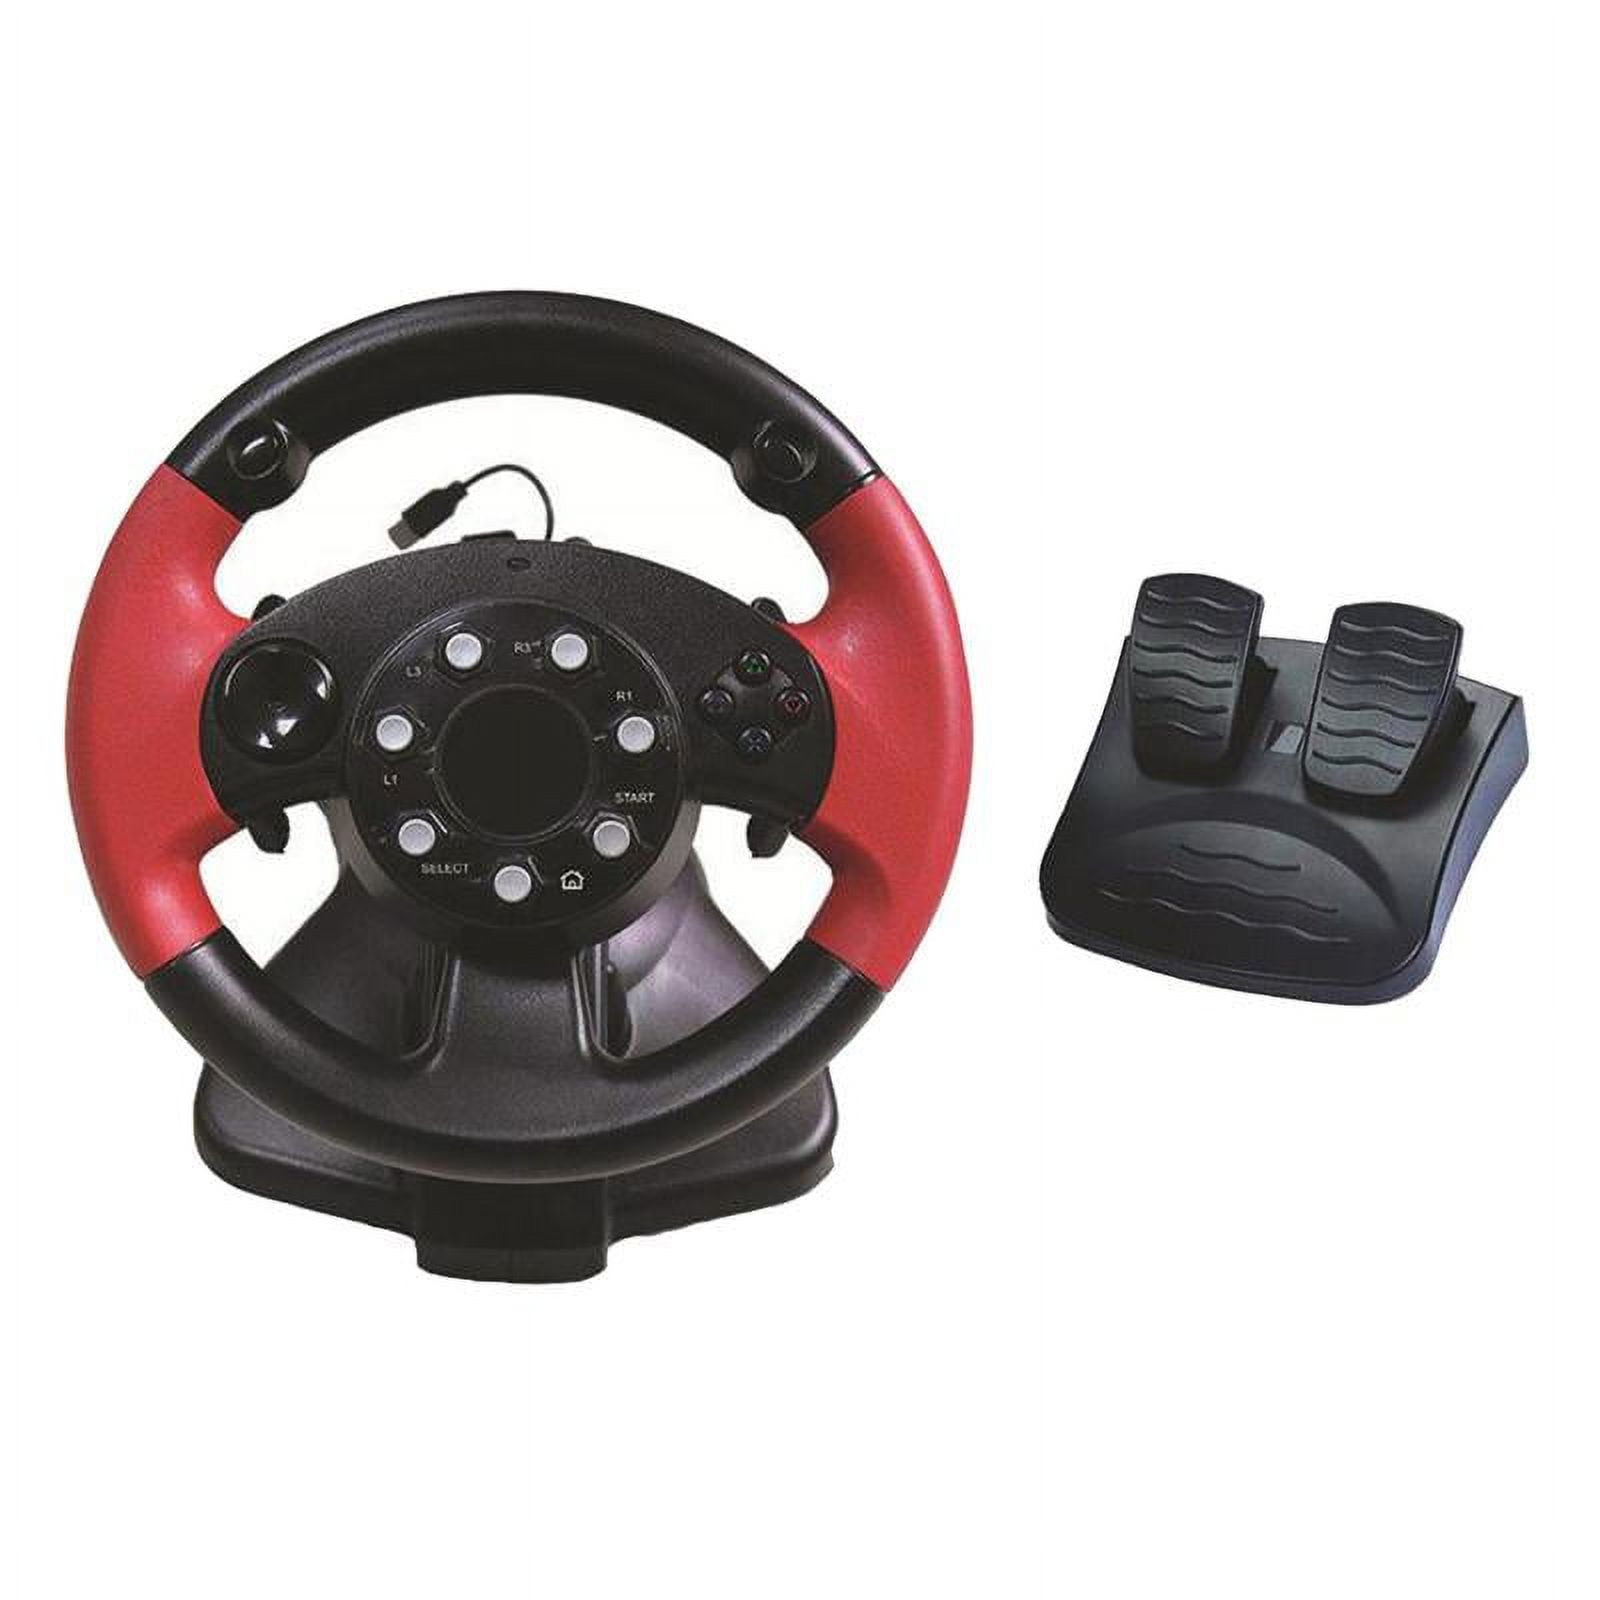 Sim Racing Wheels, Pedal Sets and Accessories